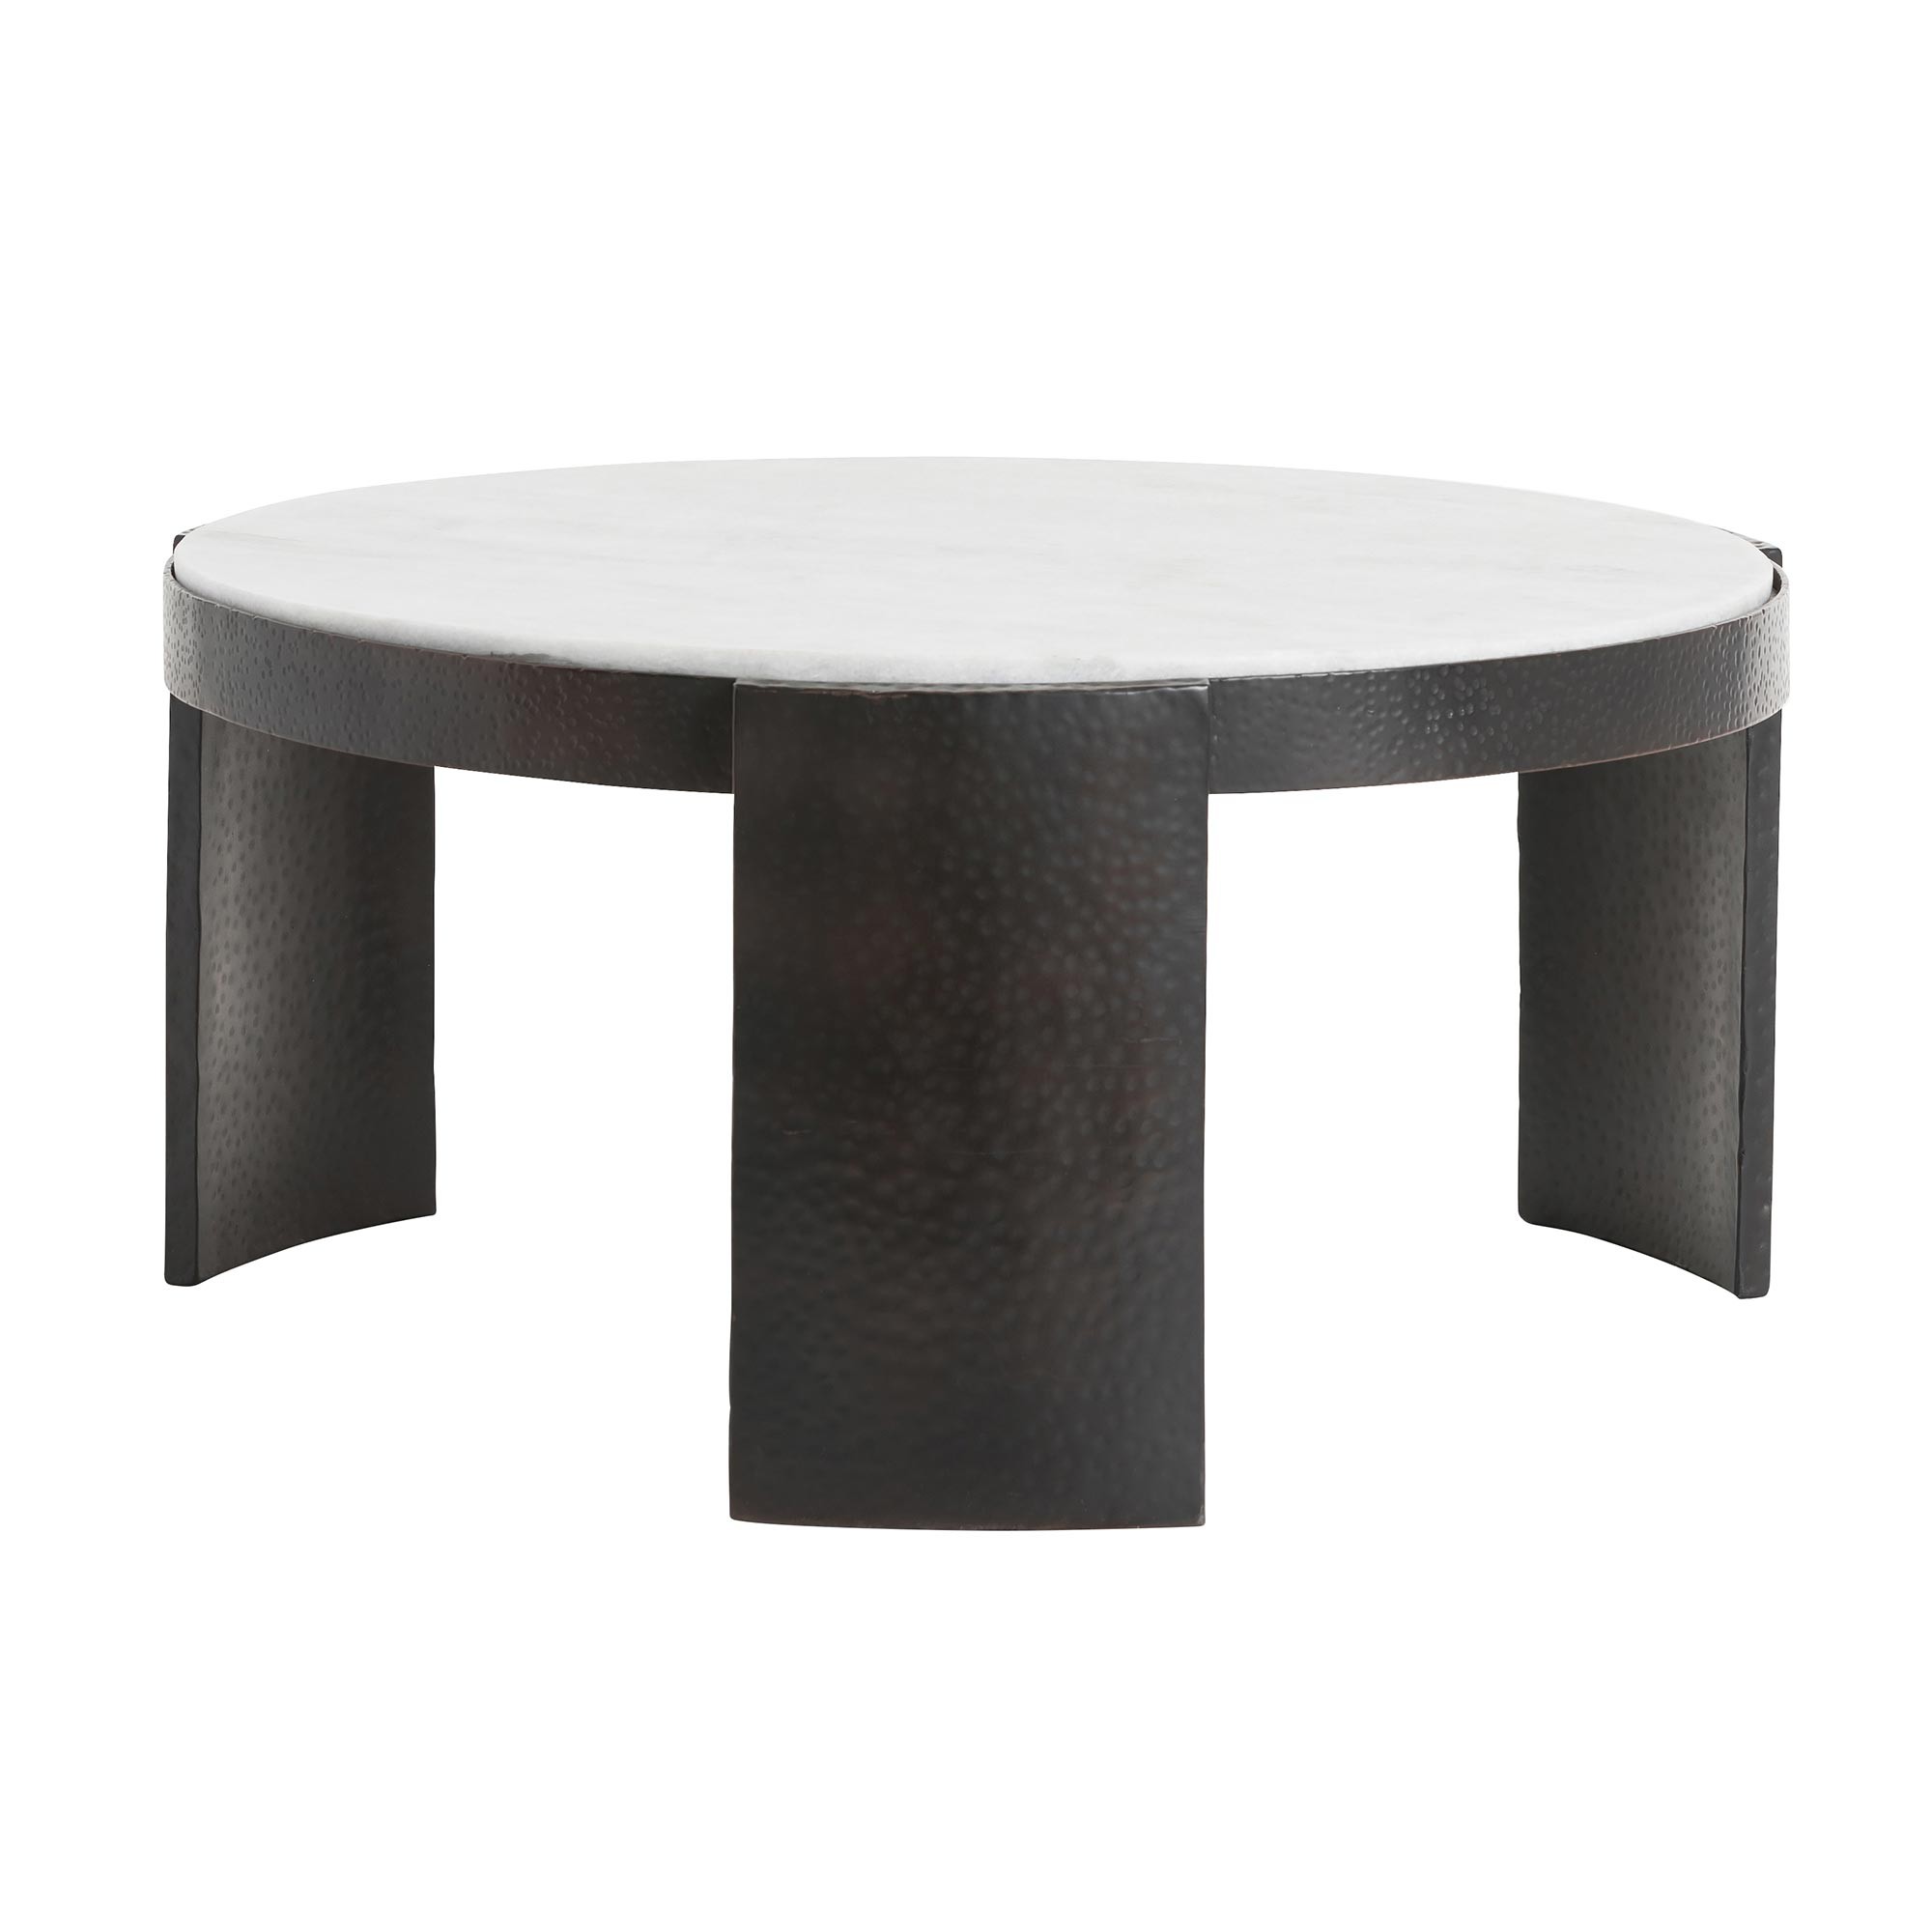 accent tables product categories pulp design studios page home glenn cocktail table lighting seattle marble end small top side black pedestal homestyle furniture pub garden patio